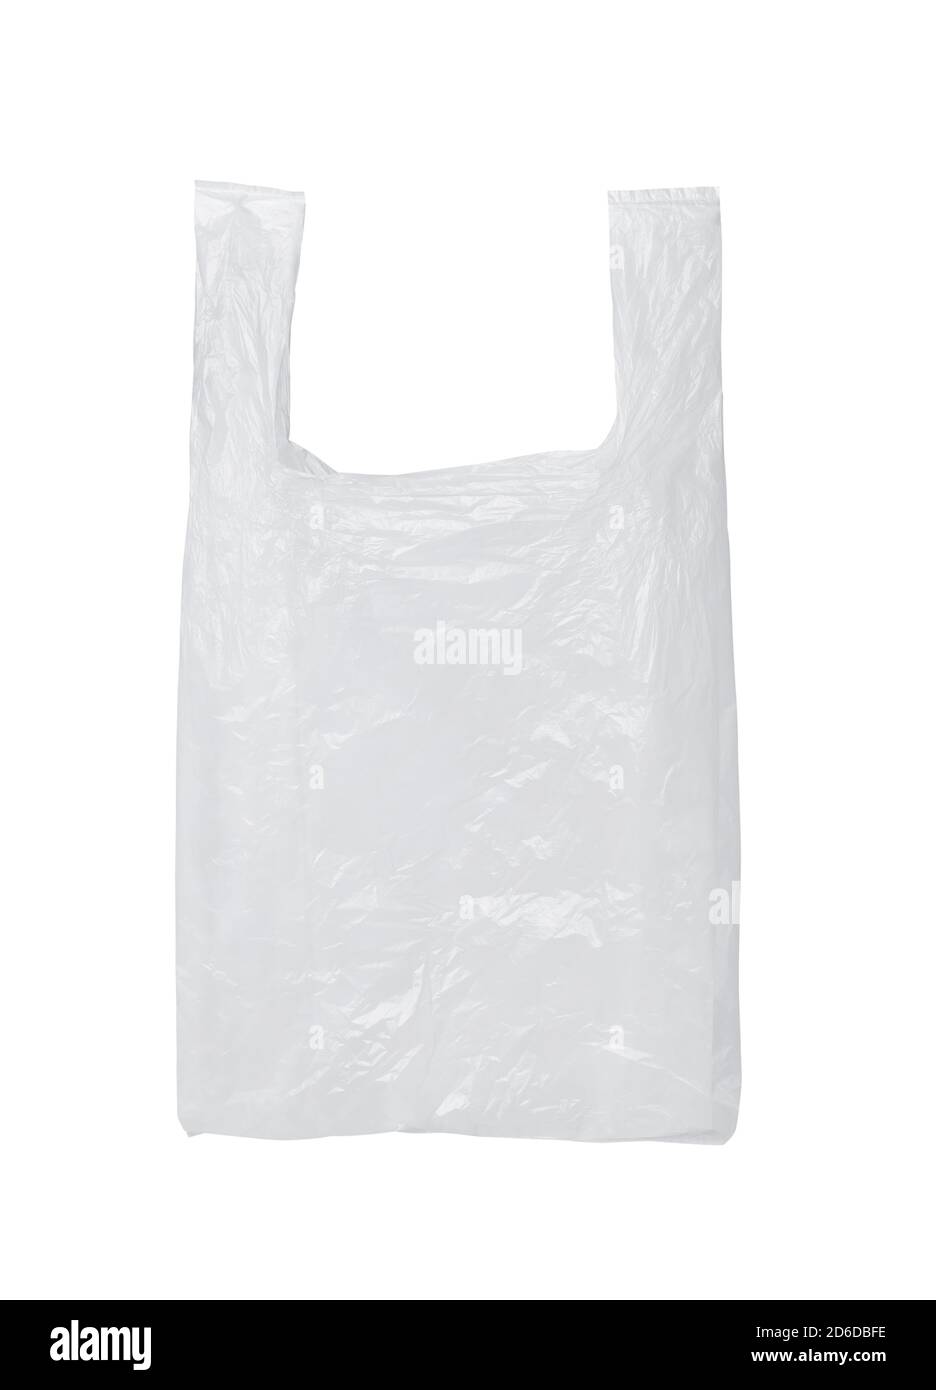 Premium Vector  Plastic bag transparent. clear pouch isolated. blank transparent  bag set with bopp package and ziplock packaging pocket. realistic empty  polypropylene bags with euro suspension for retail